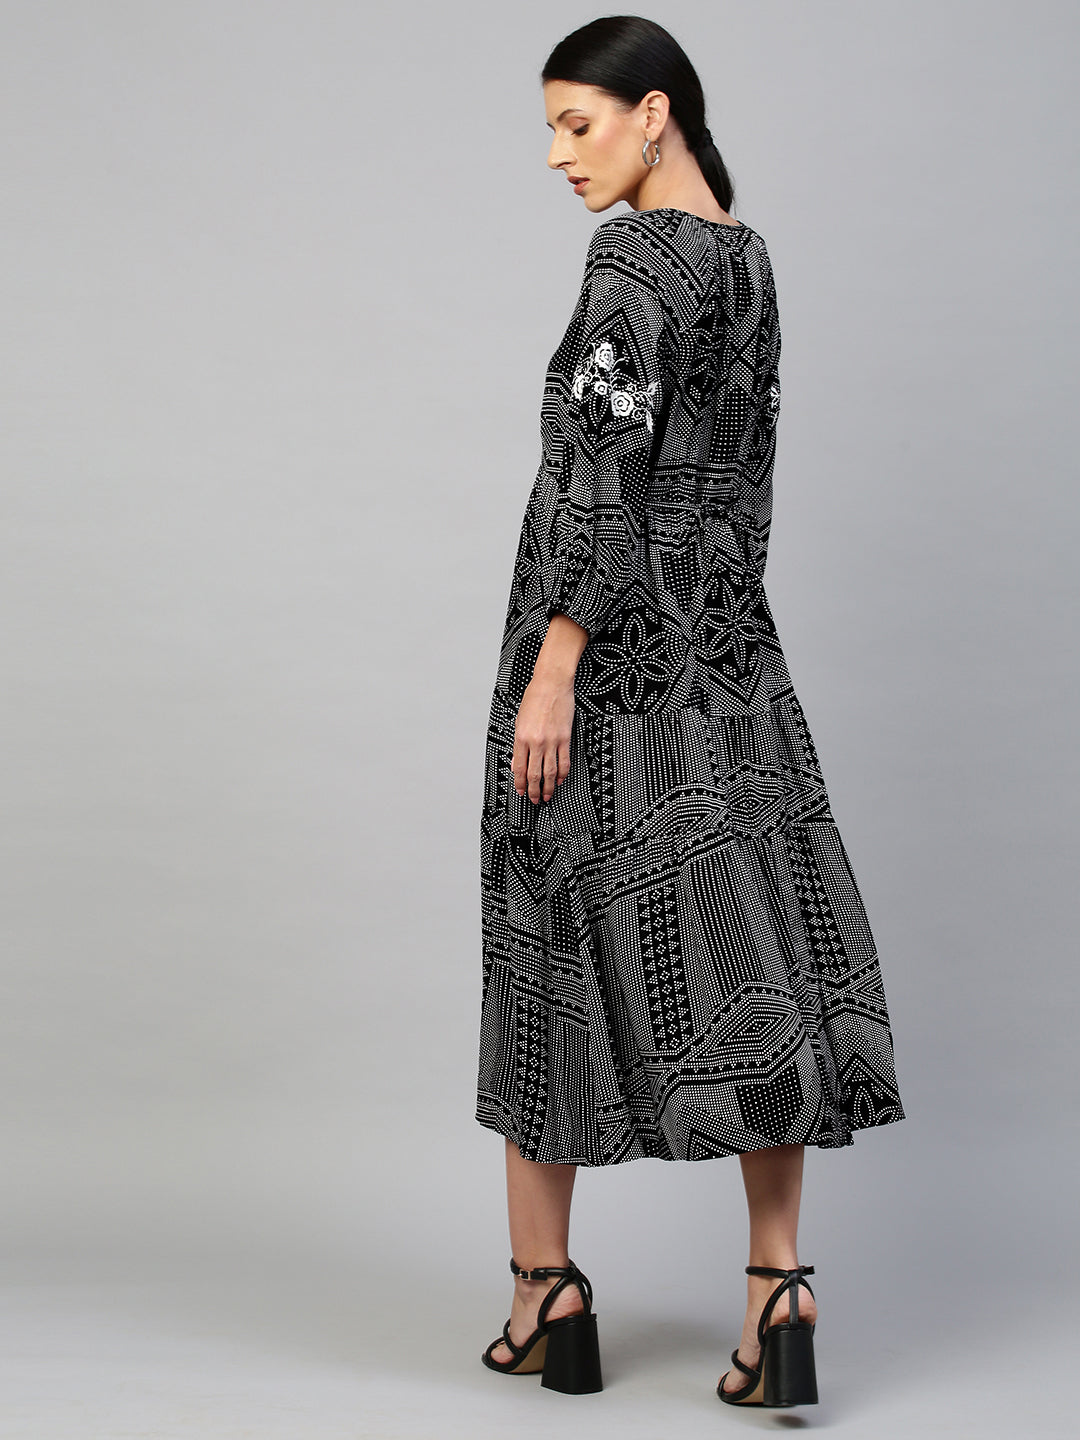 Graphic Printed Rayon Tiered Dress With Contrast Embroidery